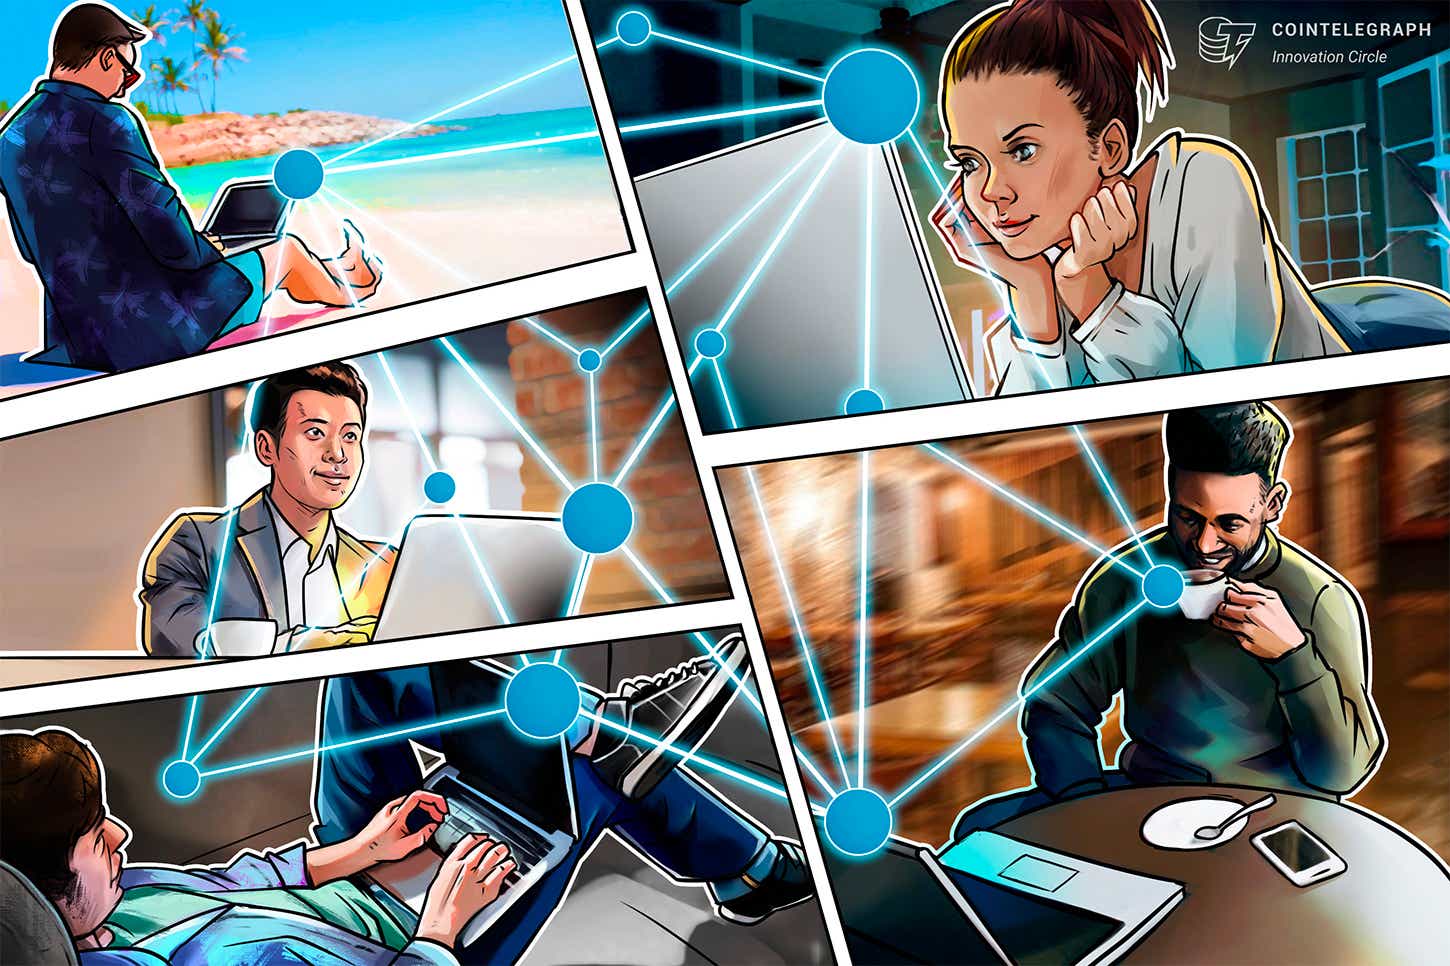 Cointelegraph-launches-innovation-circle-—-a-private-membership-service-for-industry-leaders